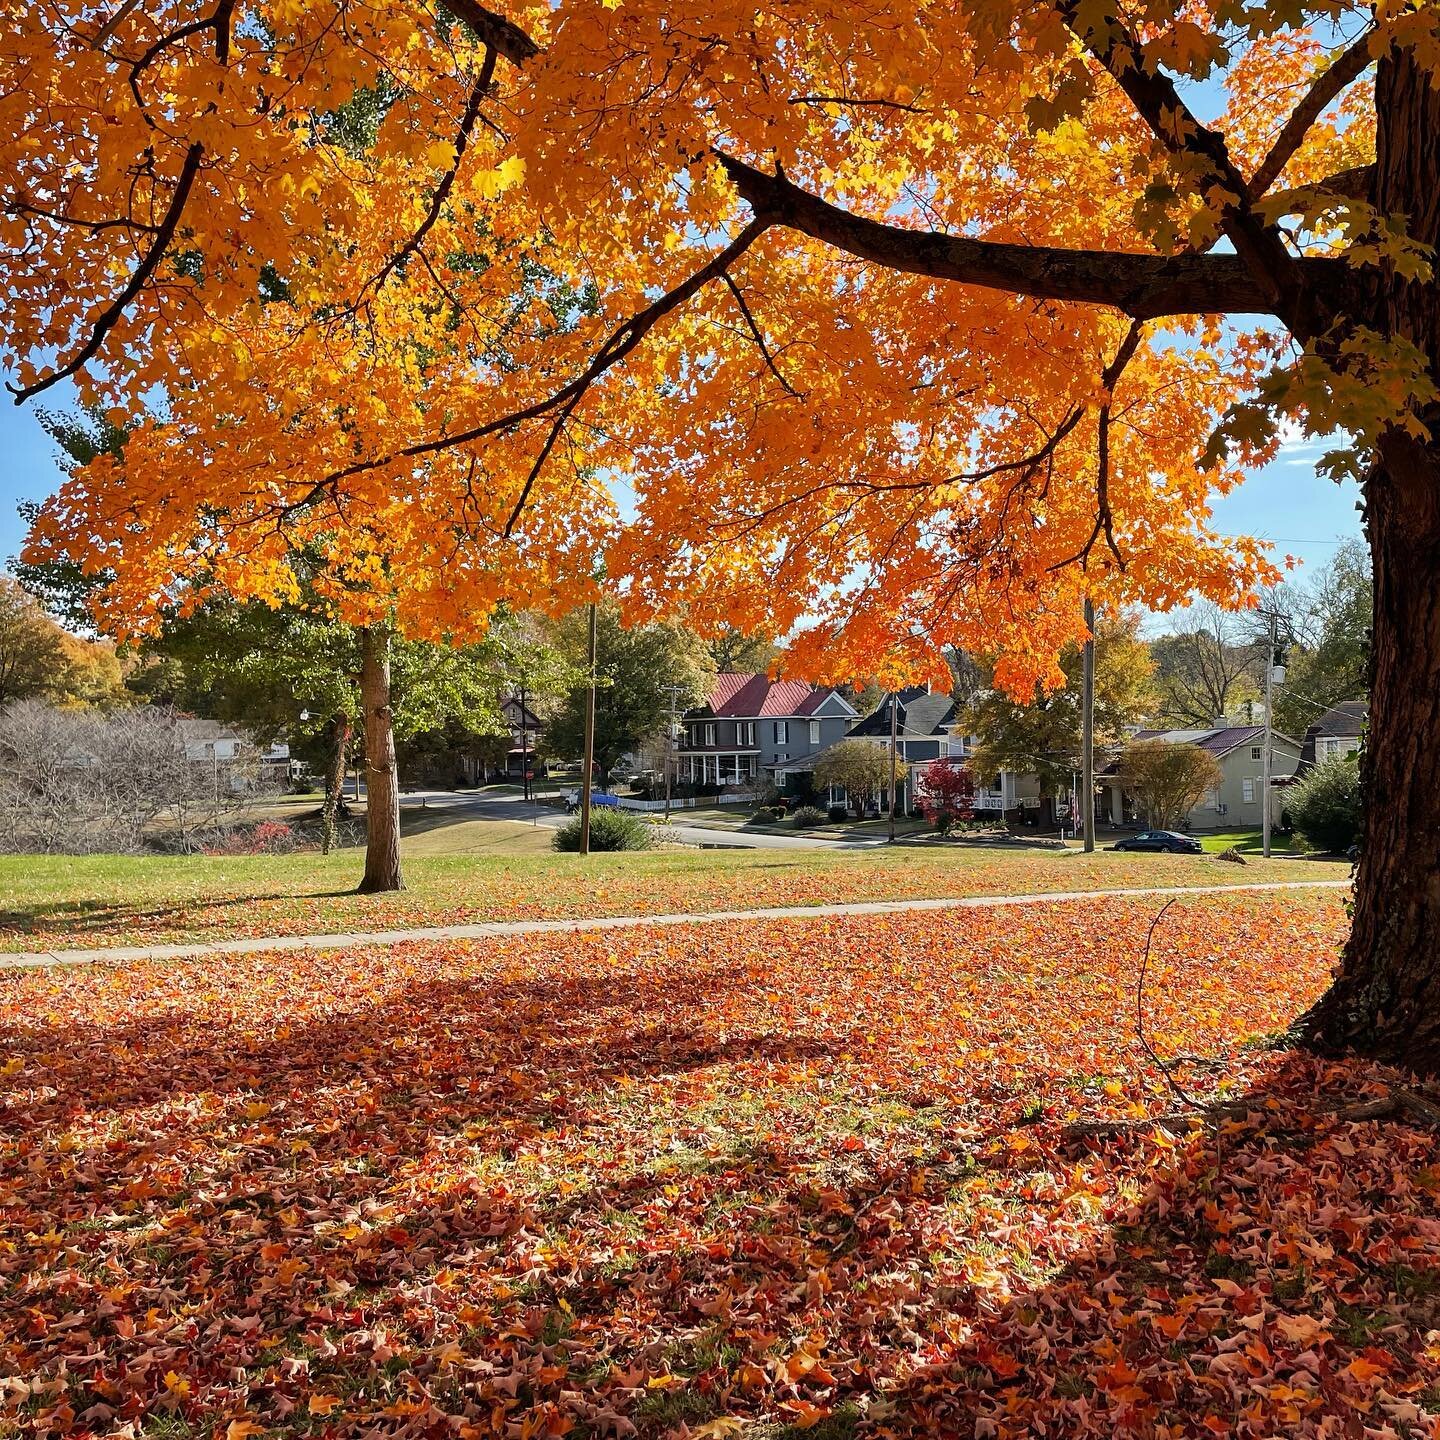 One of the best parks to enjoy all the colors of fall. 
#poplarlawnpark #fallcolors #centralpark #petersburgva #poplarlawnhistoricdustrict